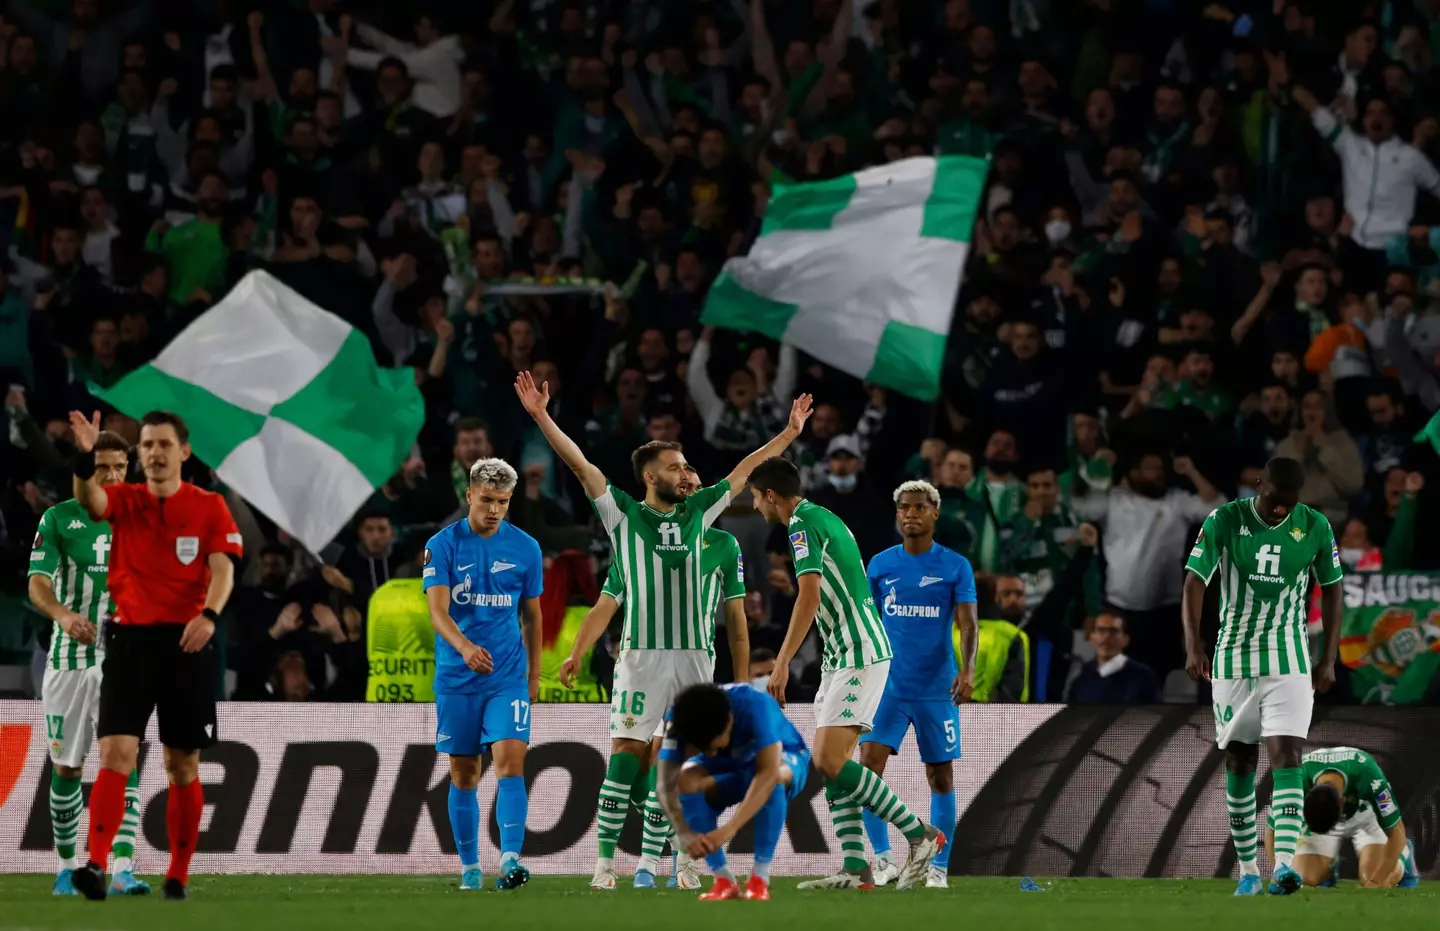 Betis knocked Zenit out of the Europa League last season. Image: PA Images